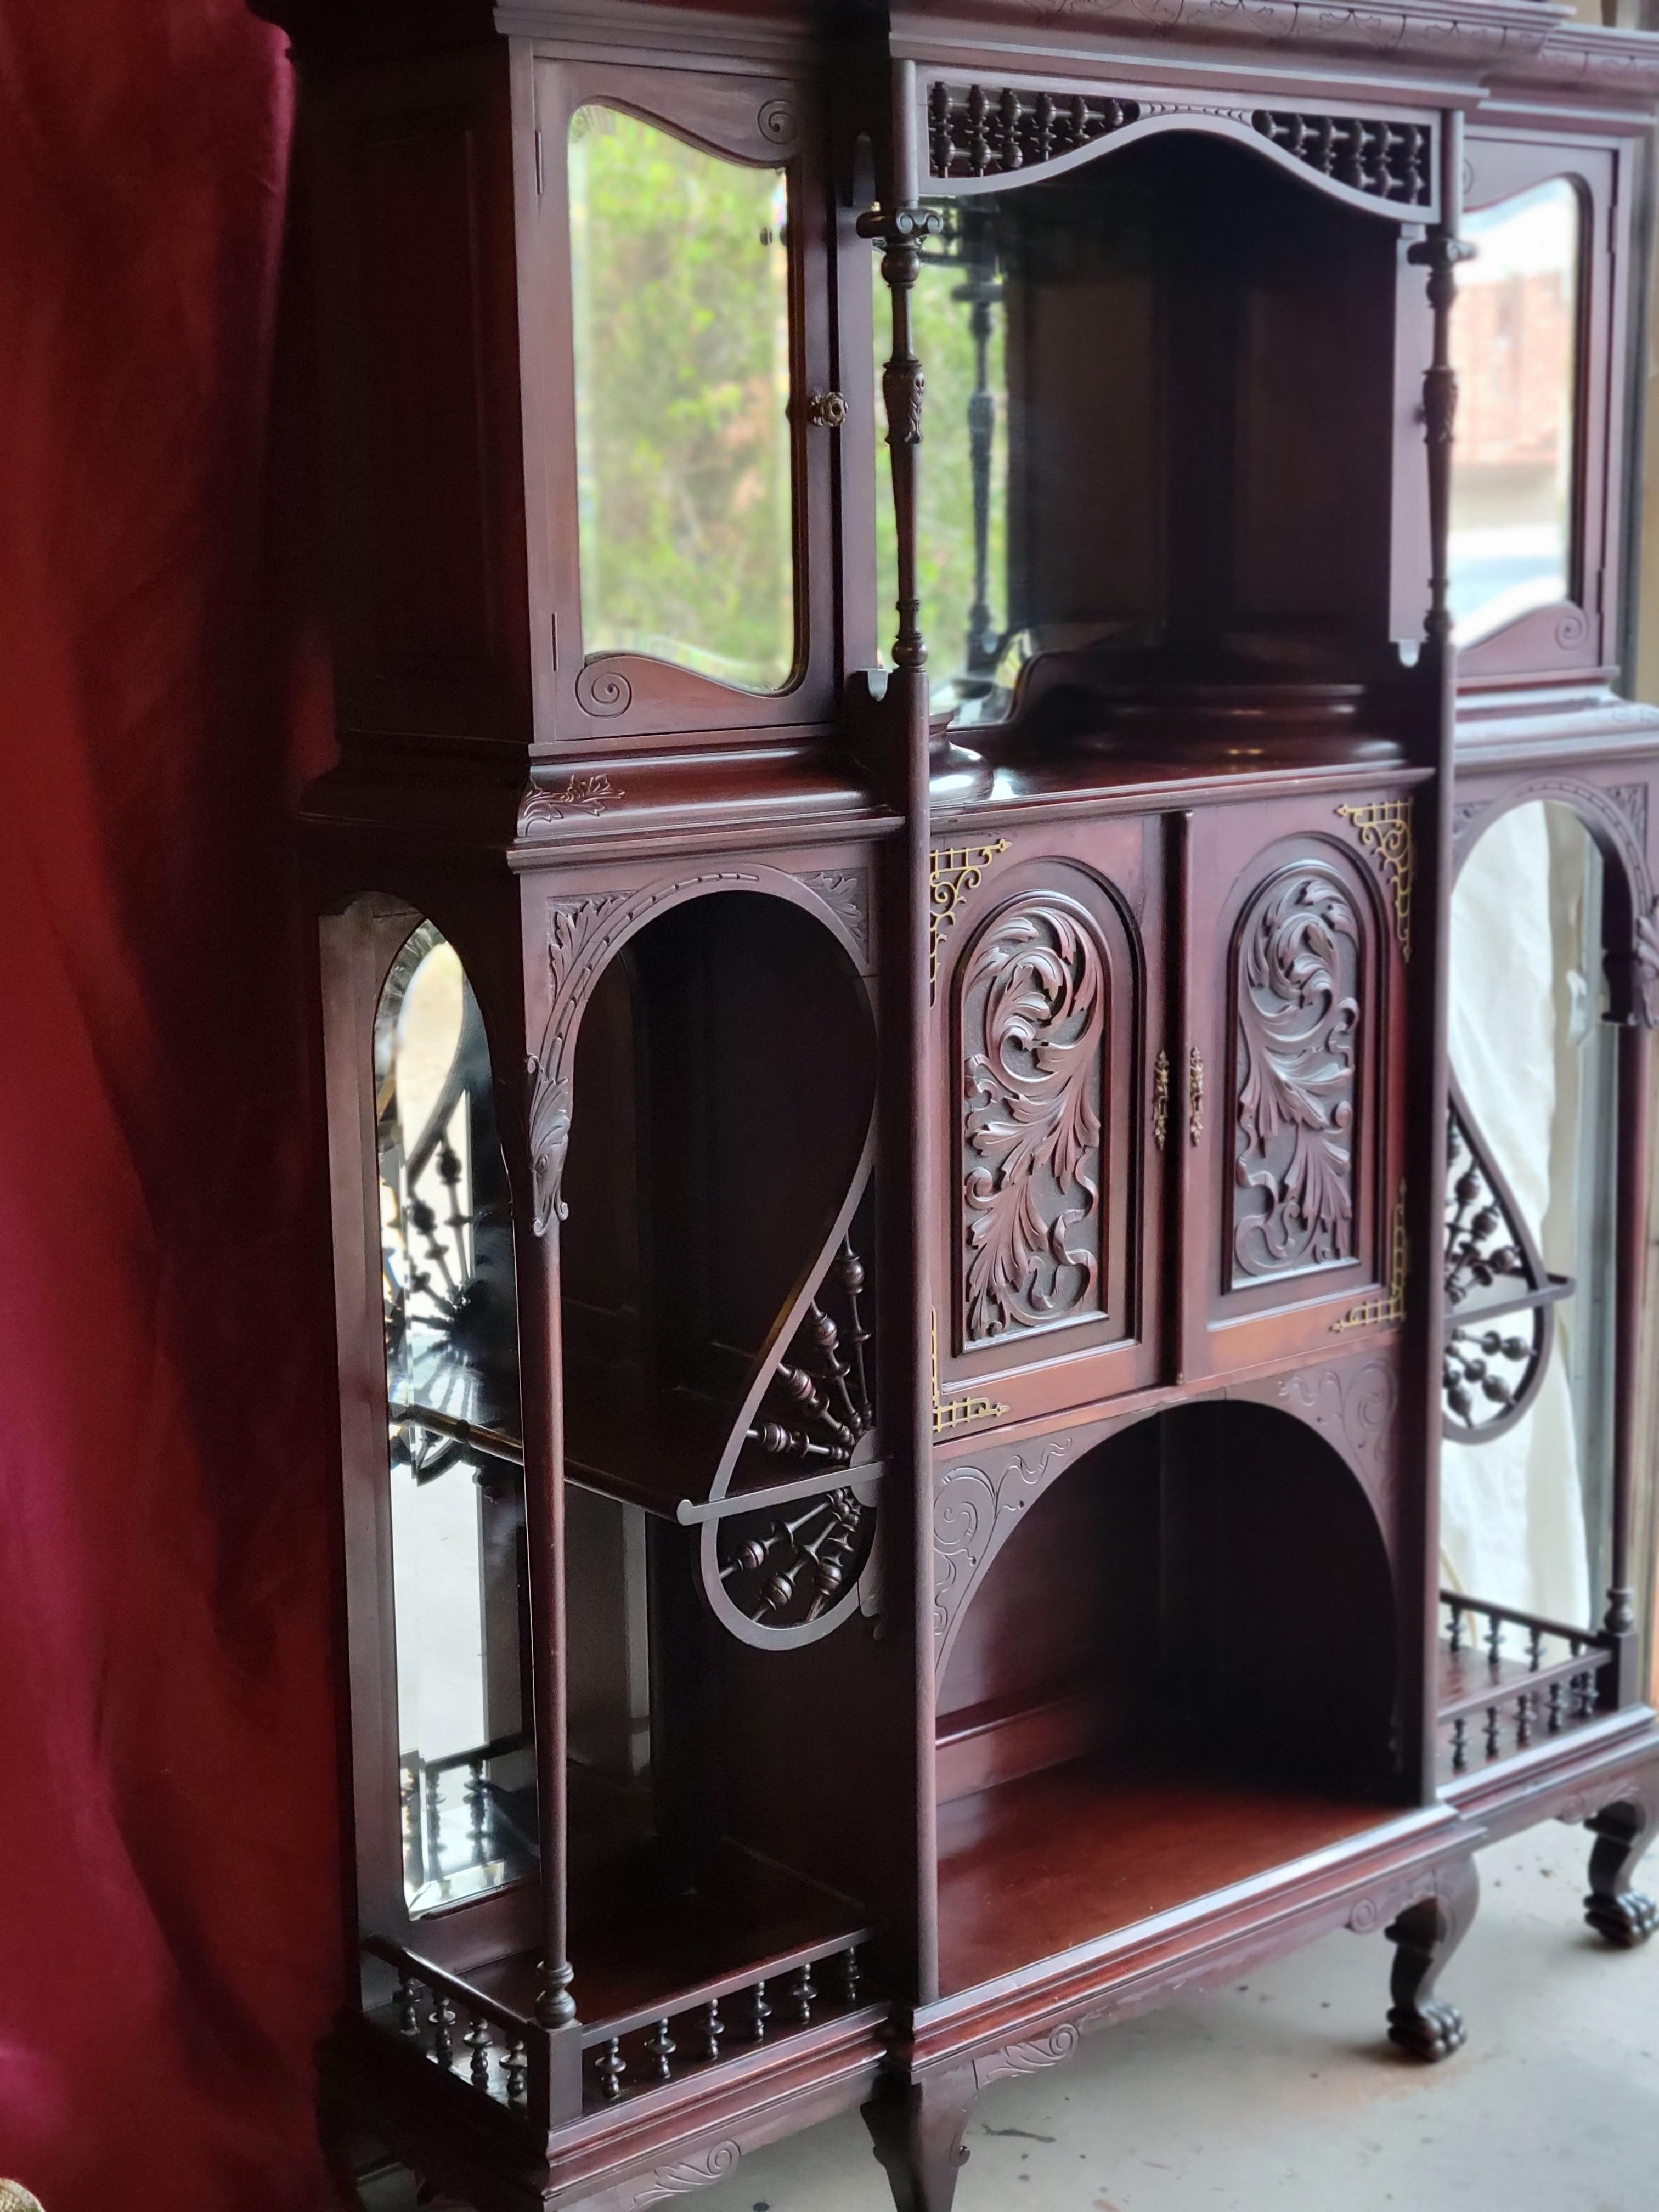 Antique solid wood art nouveau etagere. The wood is very heavy and has a high dencity: might be rosewood or a heavy mahogany. Solid and heavy. 74